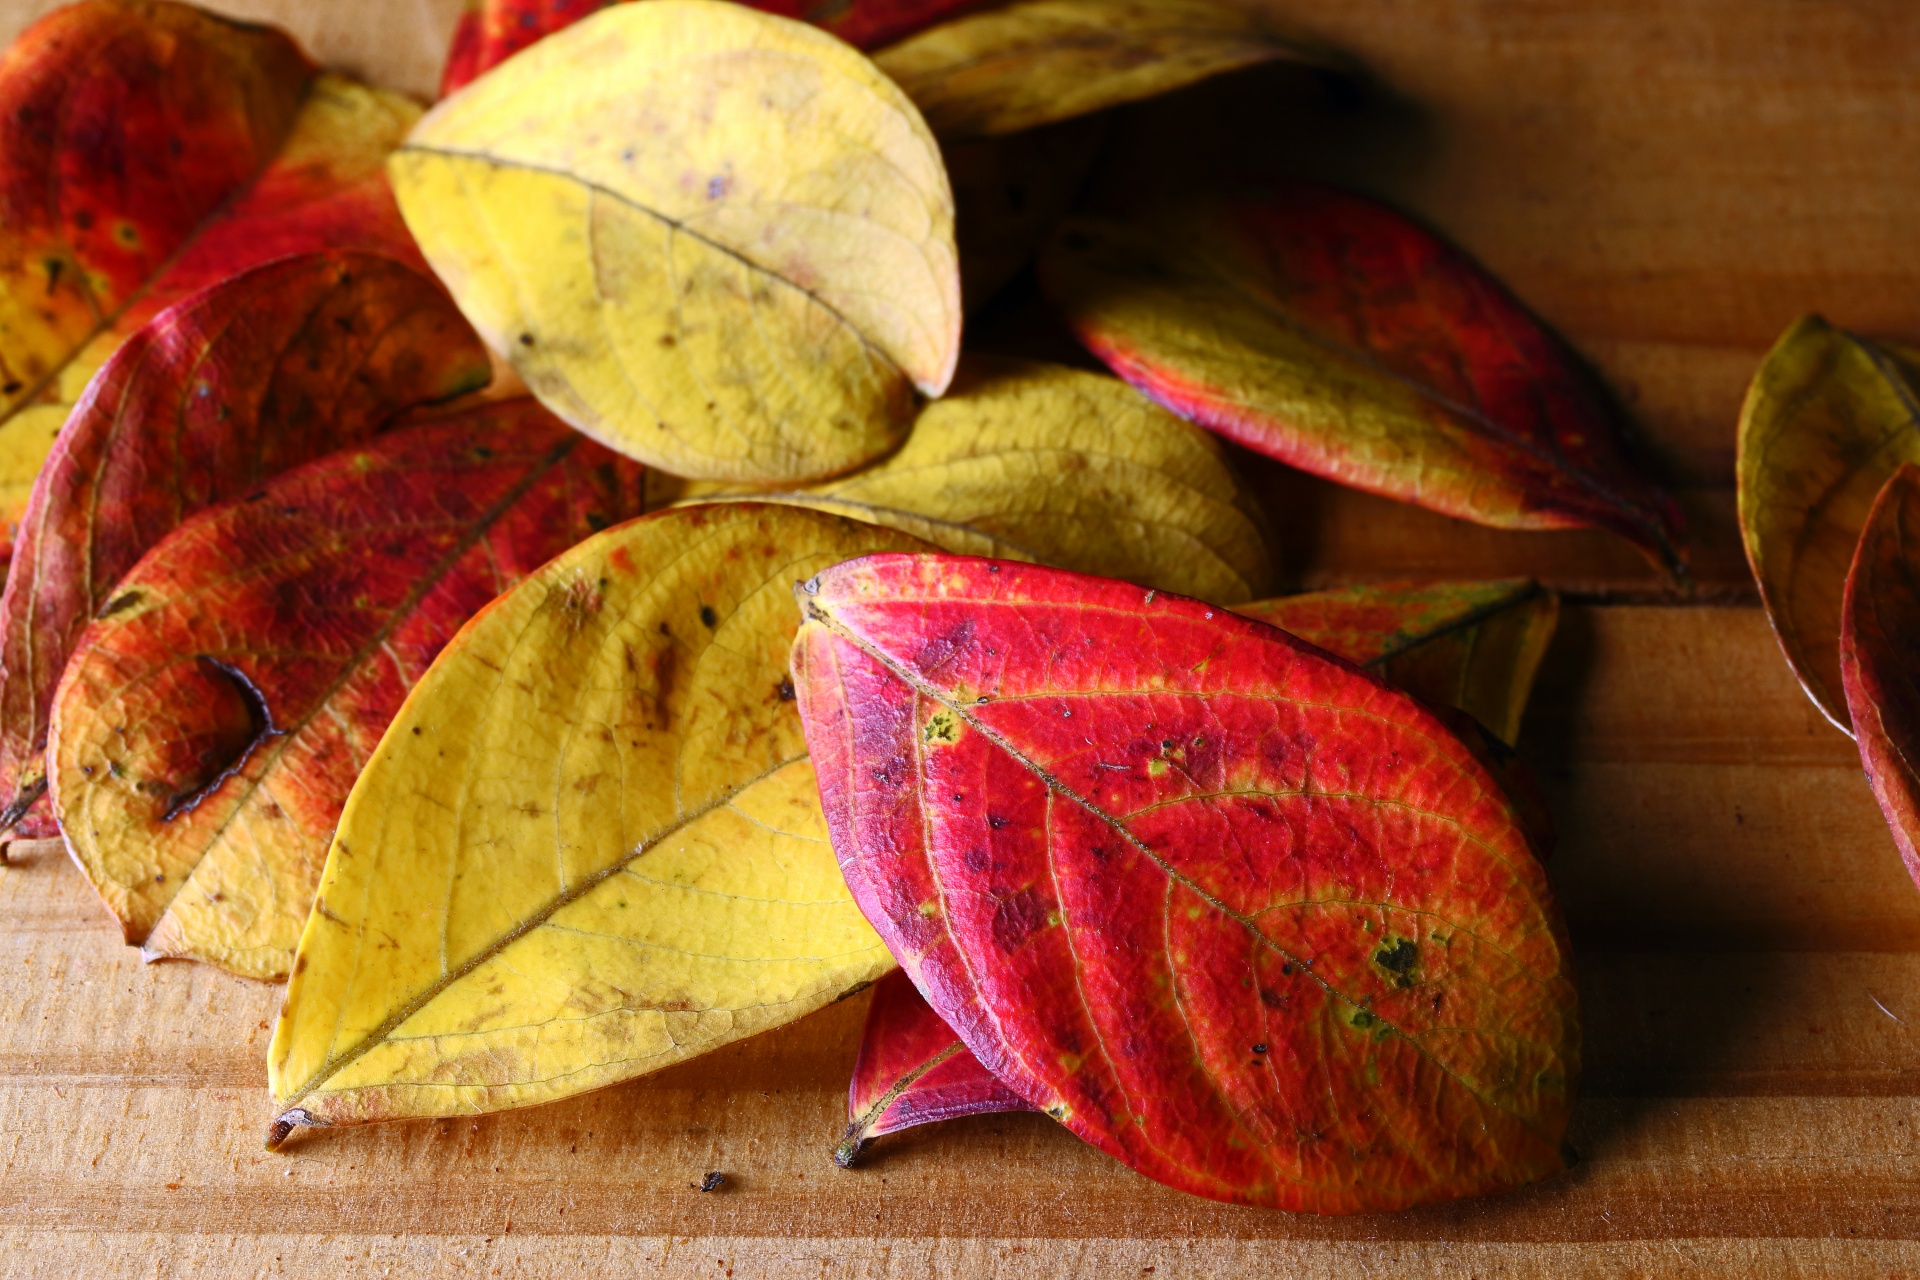 Fallen pride of india leaves in autumn on a table top